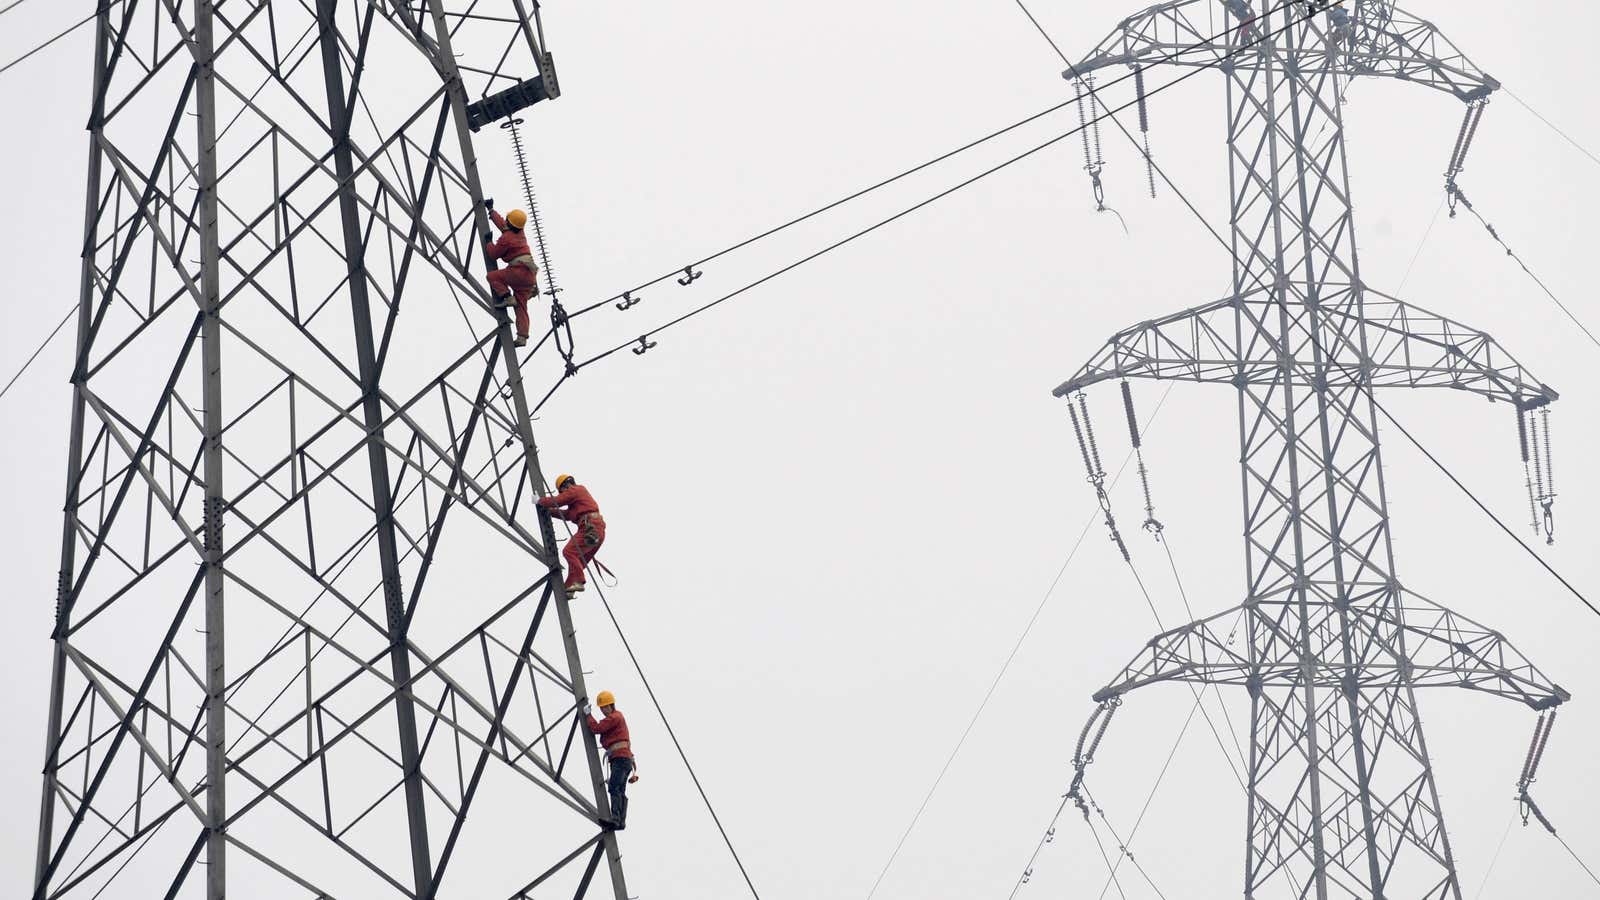 China is far ahead of the US on high-powered electricity transmission lines, mainly because of a bureaucratic hurdle that the infrastructure bill aims to fix.